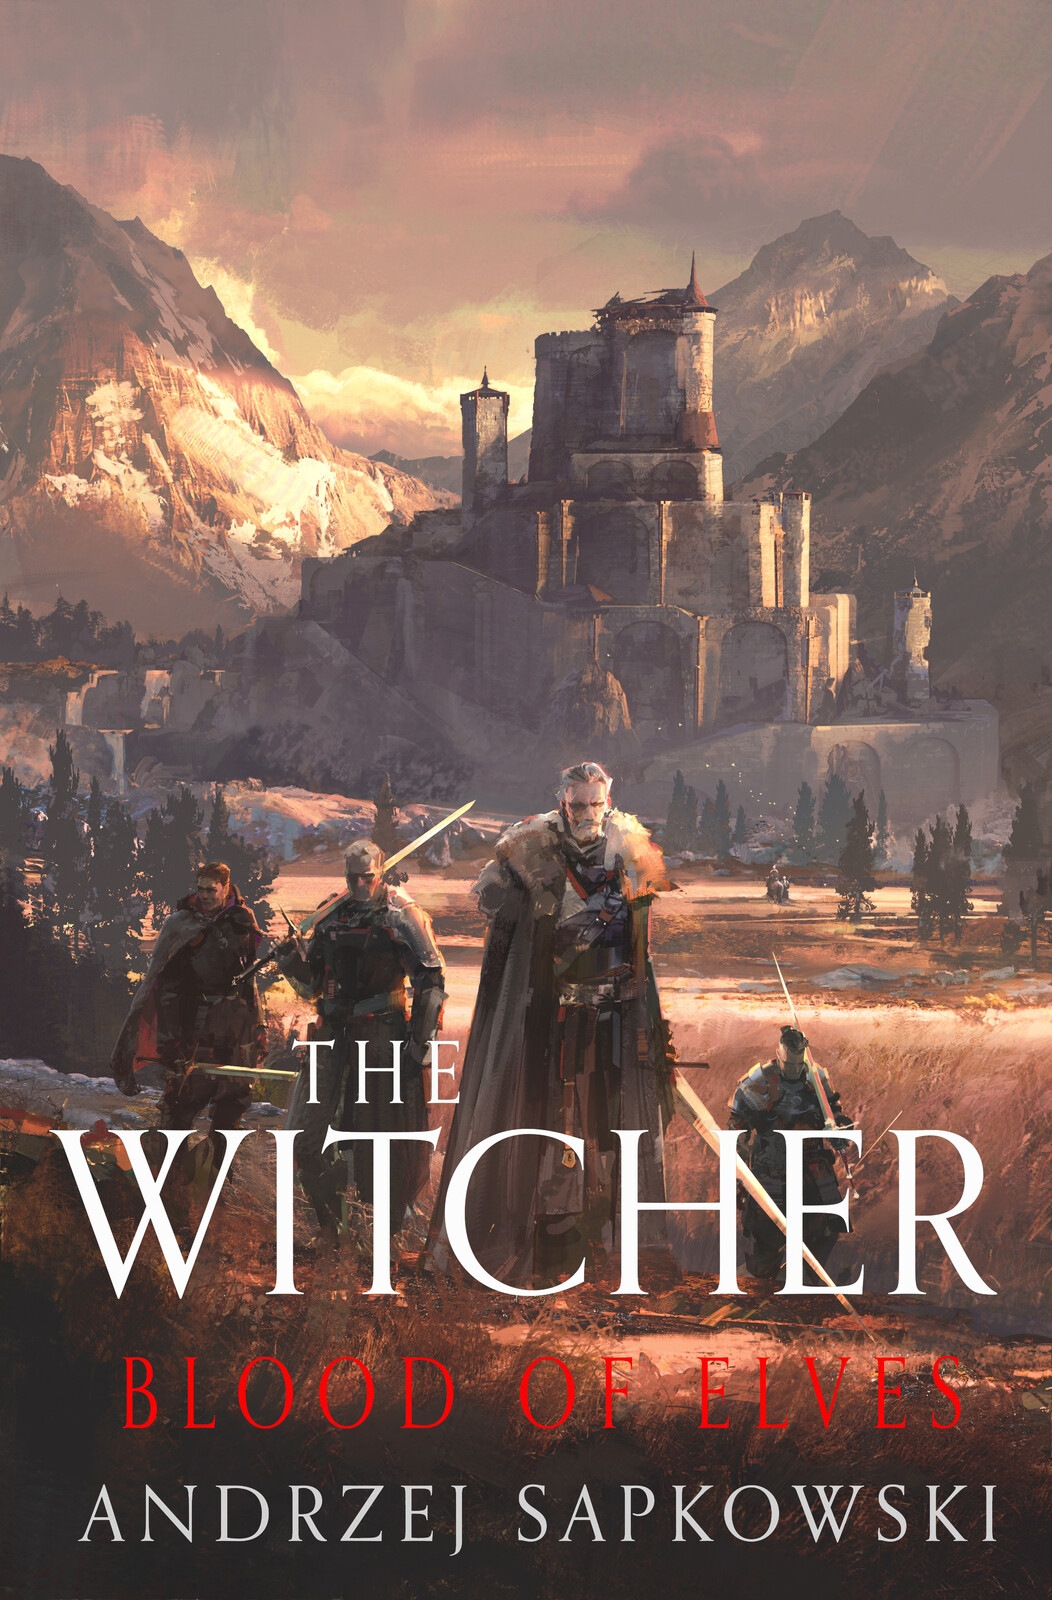 The Witcher Blood of Elves cover art